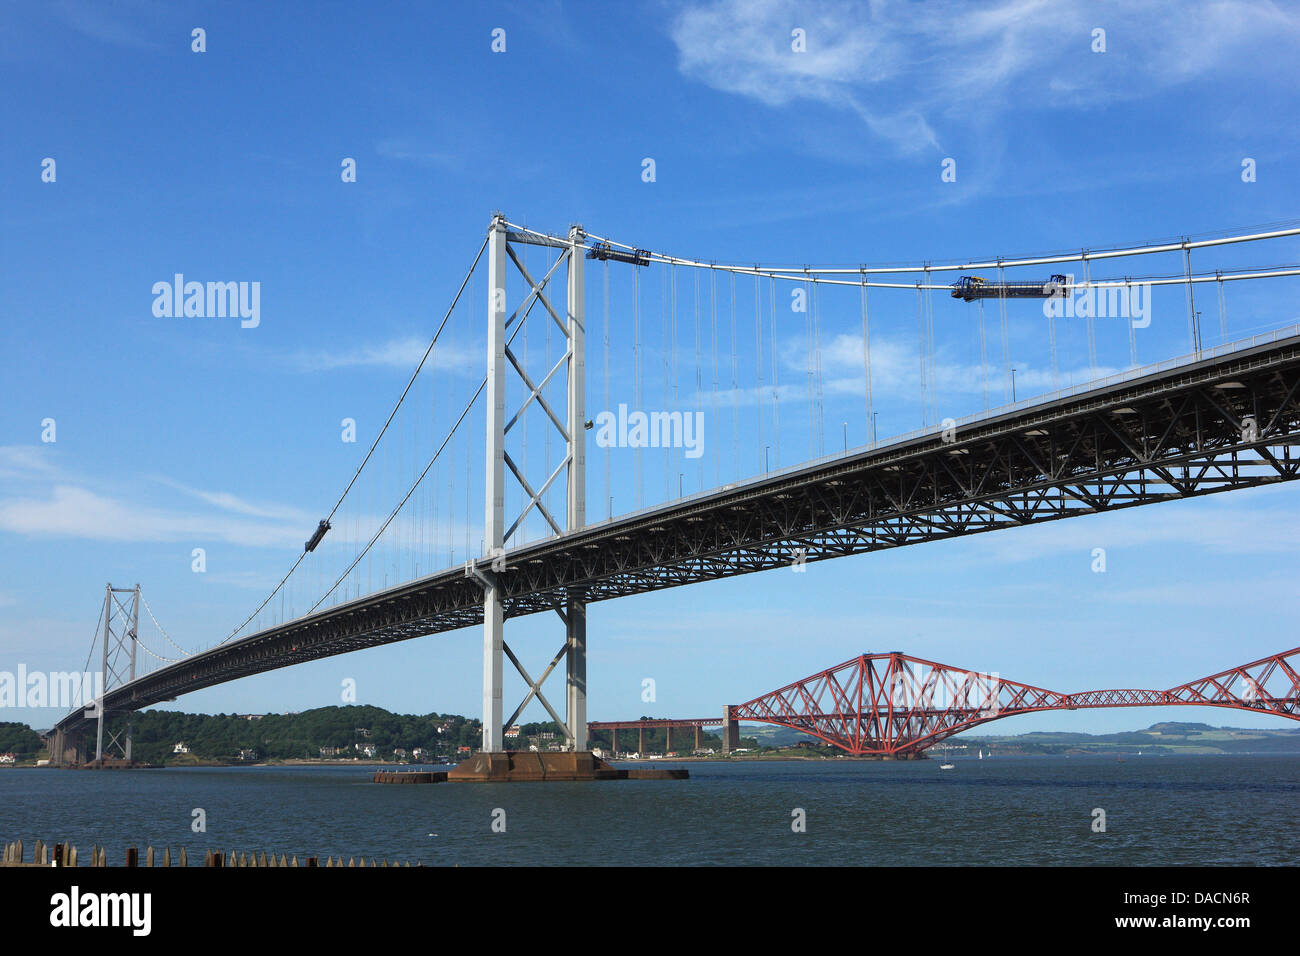 The Forth Rail Bridge seen below the Forth Road Bridge spanning the Firth of Forth from South to North Queensferry in Scotland Stock Photo